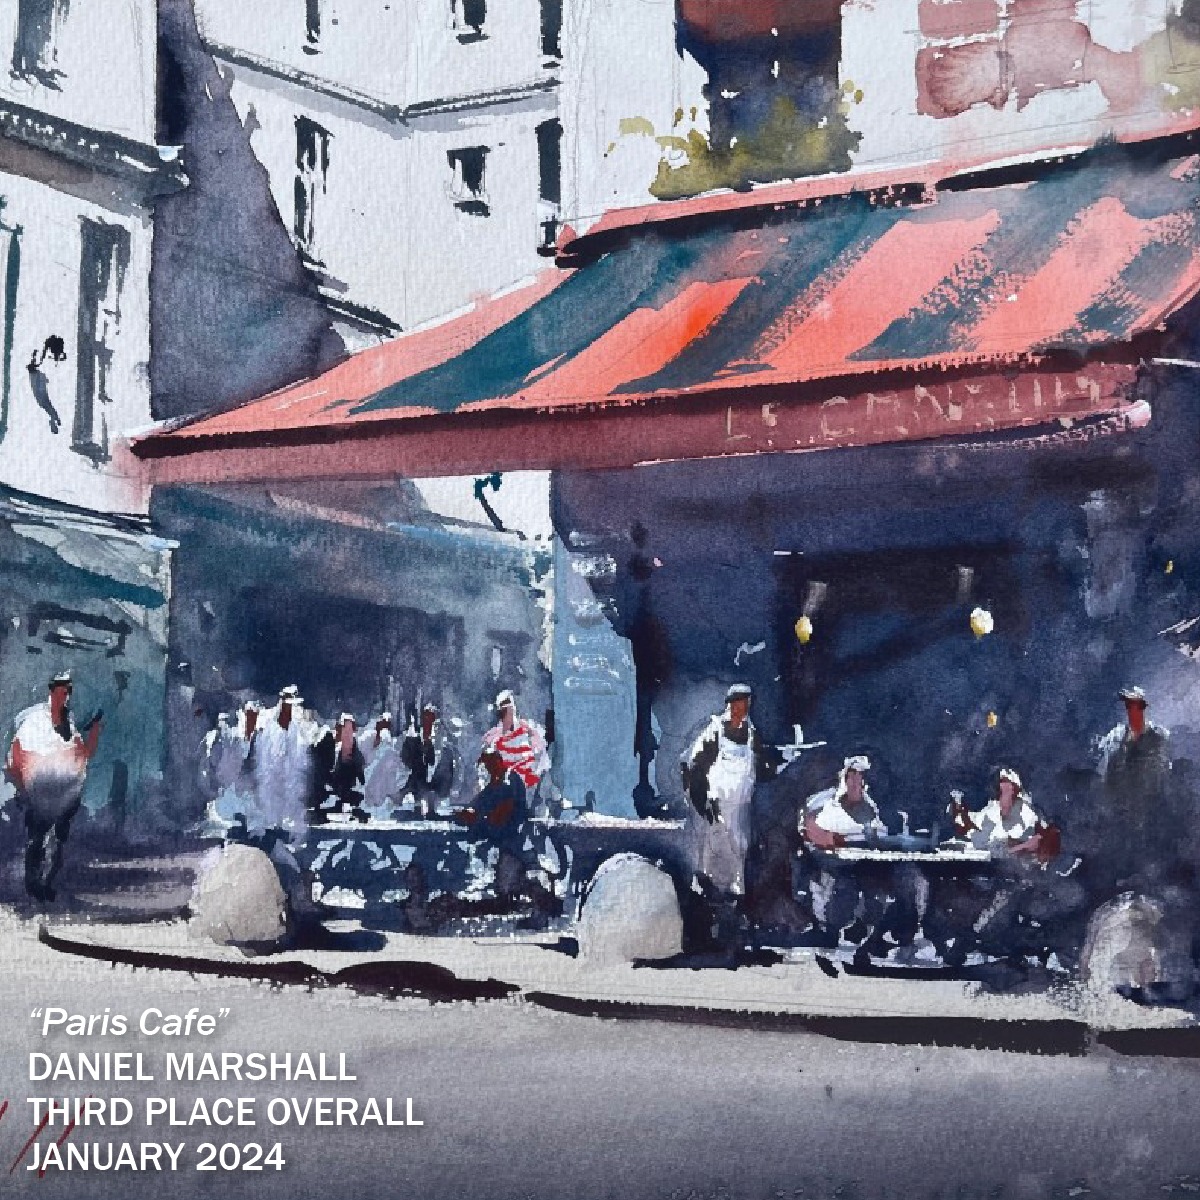 13th Annual PleinAir Salon Online Art Competition January Third Place Winner Dan Marshall watercolor painting of cafe in Paris